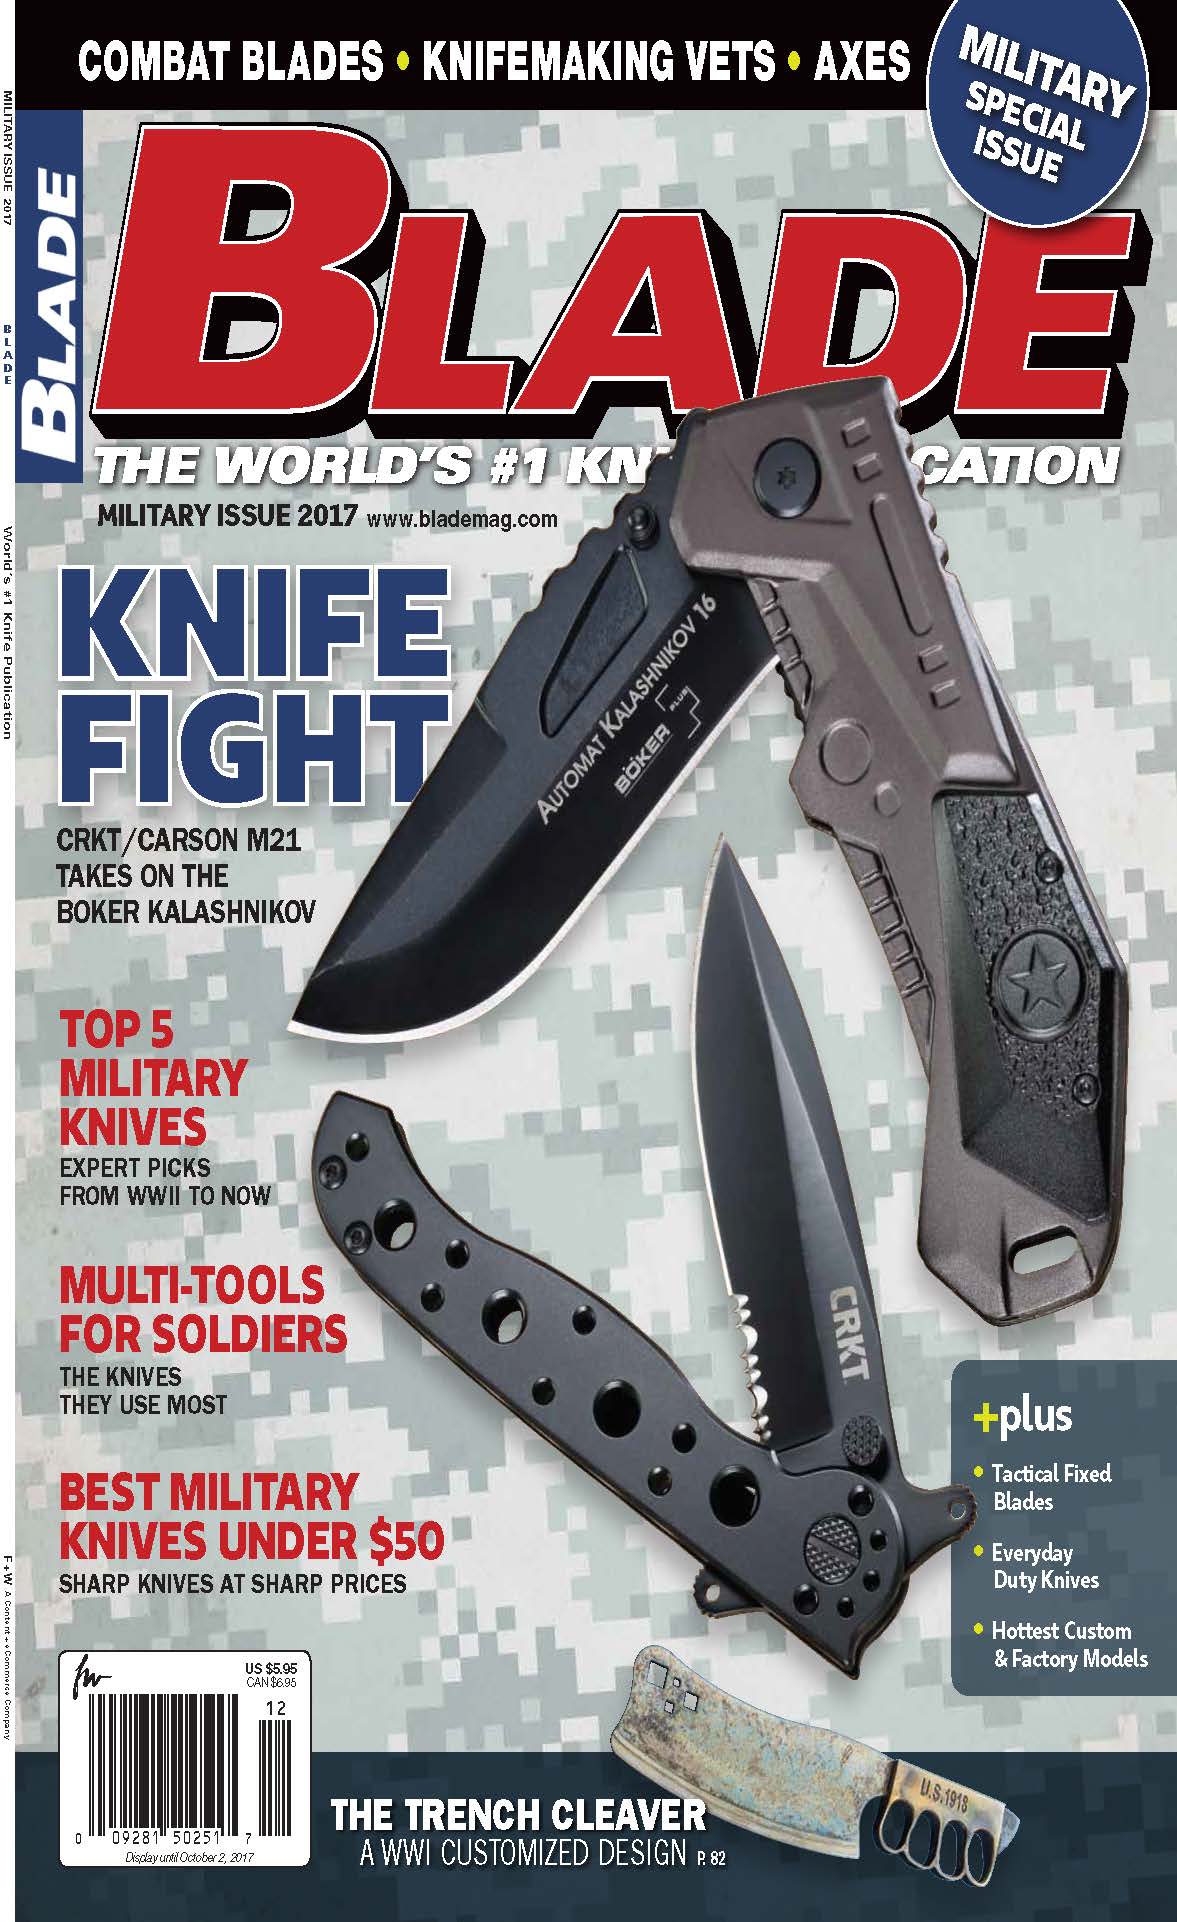 BLADE and top 5 U.S. military knives